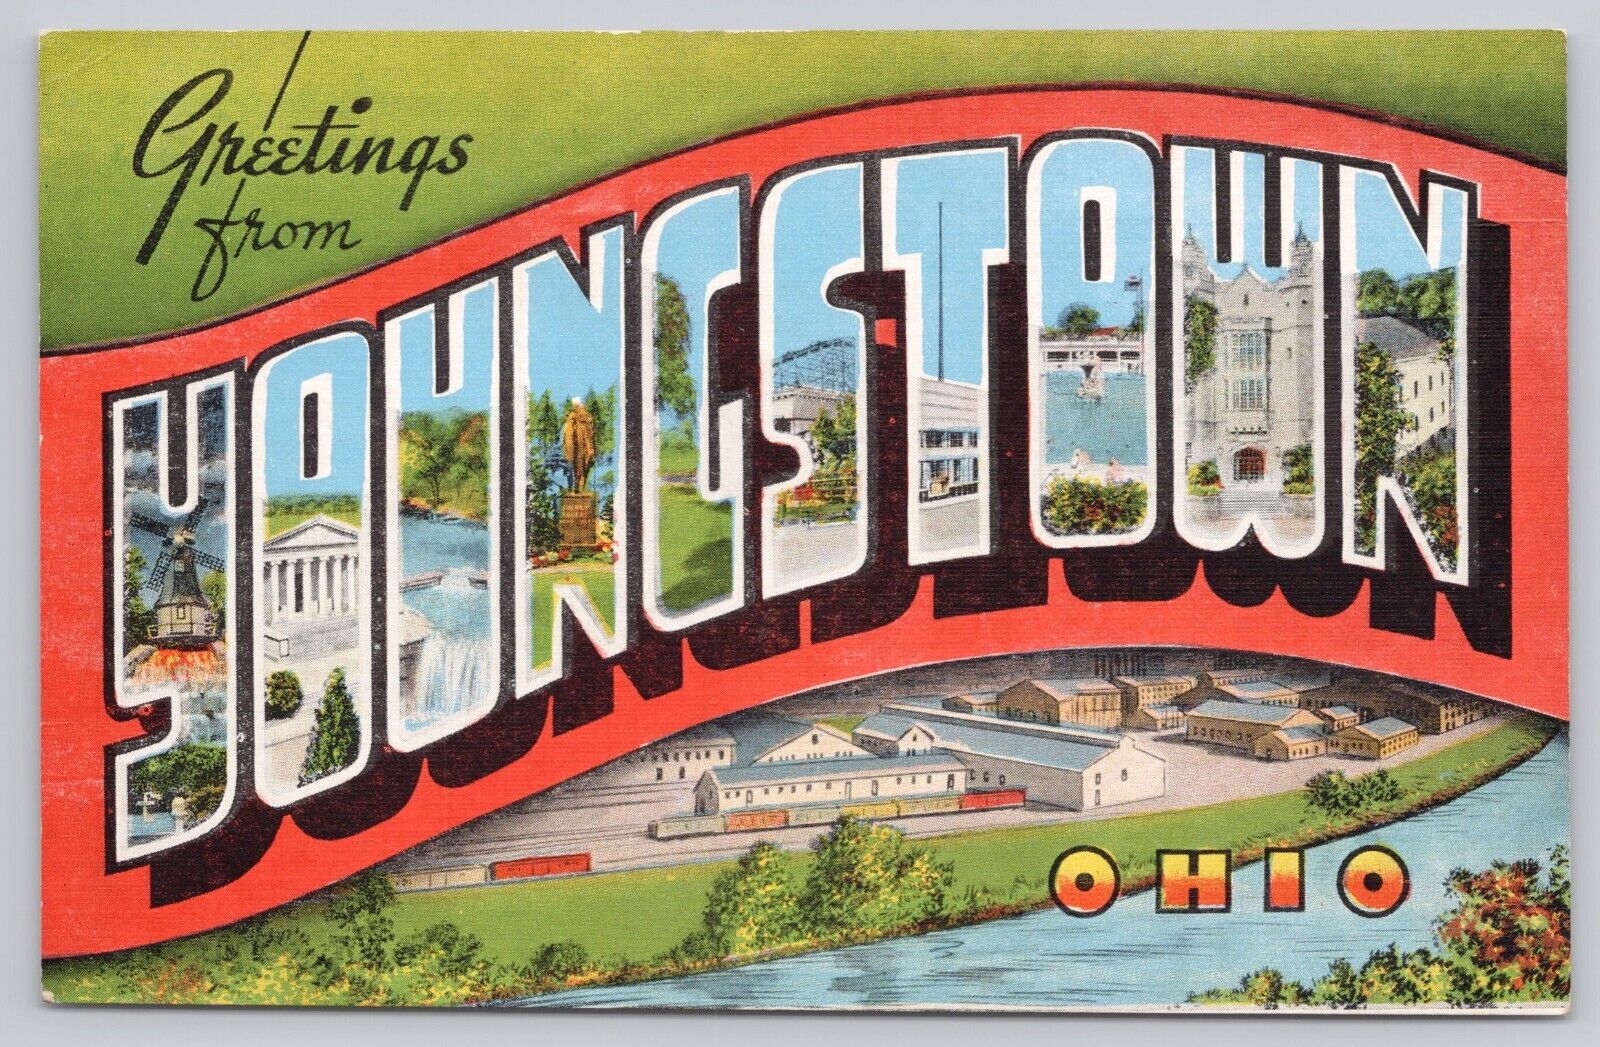 Youngstown Ohio, Large Letter Greetings, Vintage Postcard